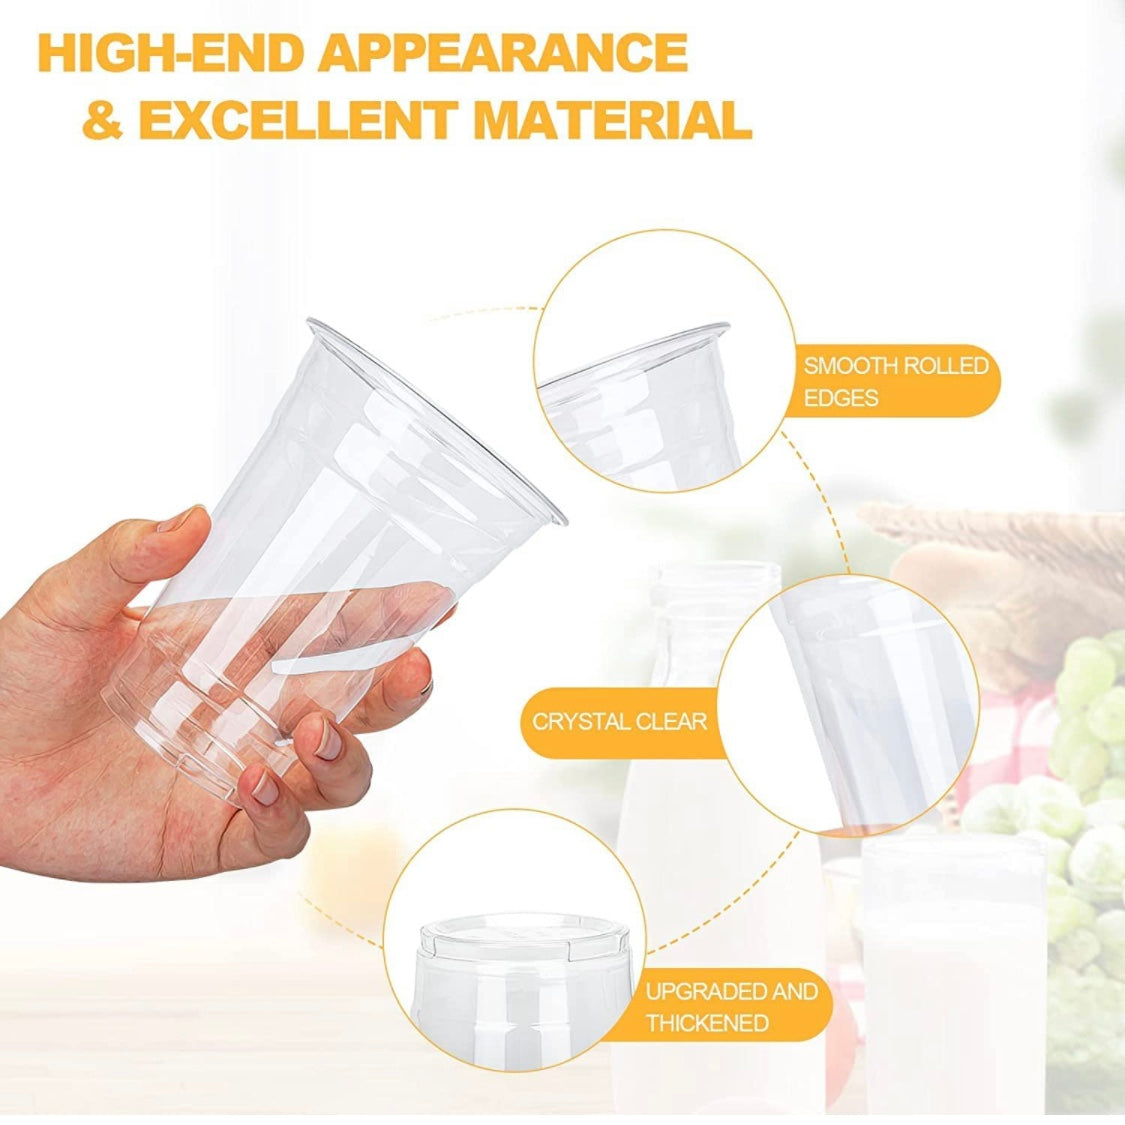 Kitcheniva Disposable Clear Plastic Cups With Flat Lids 16 oz Set